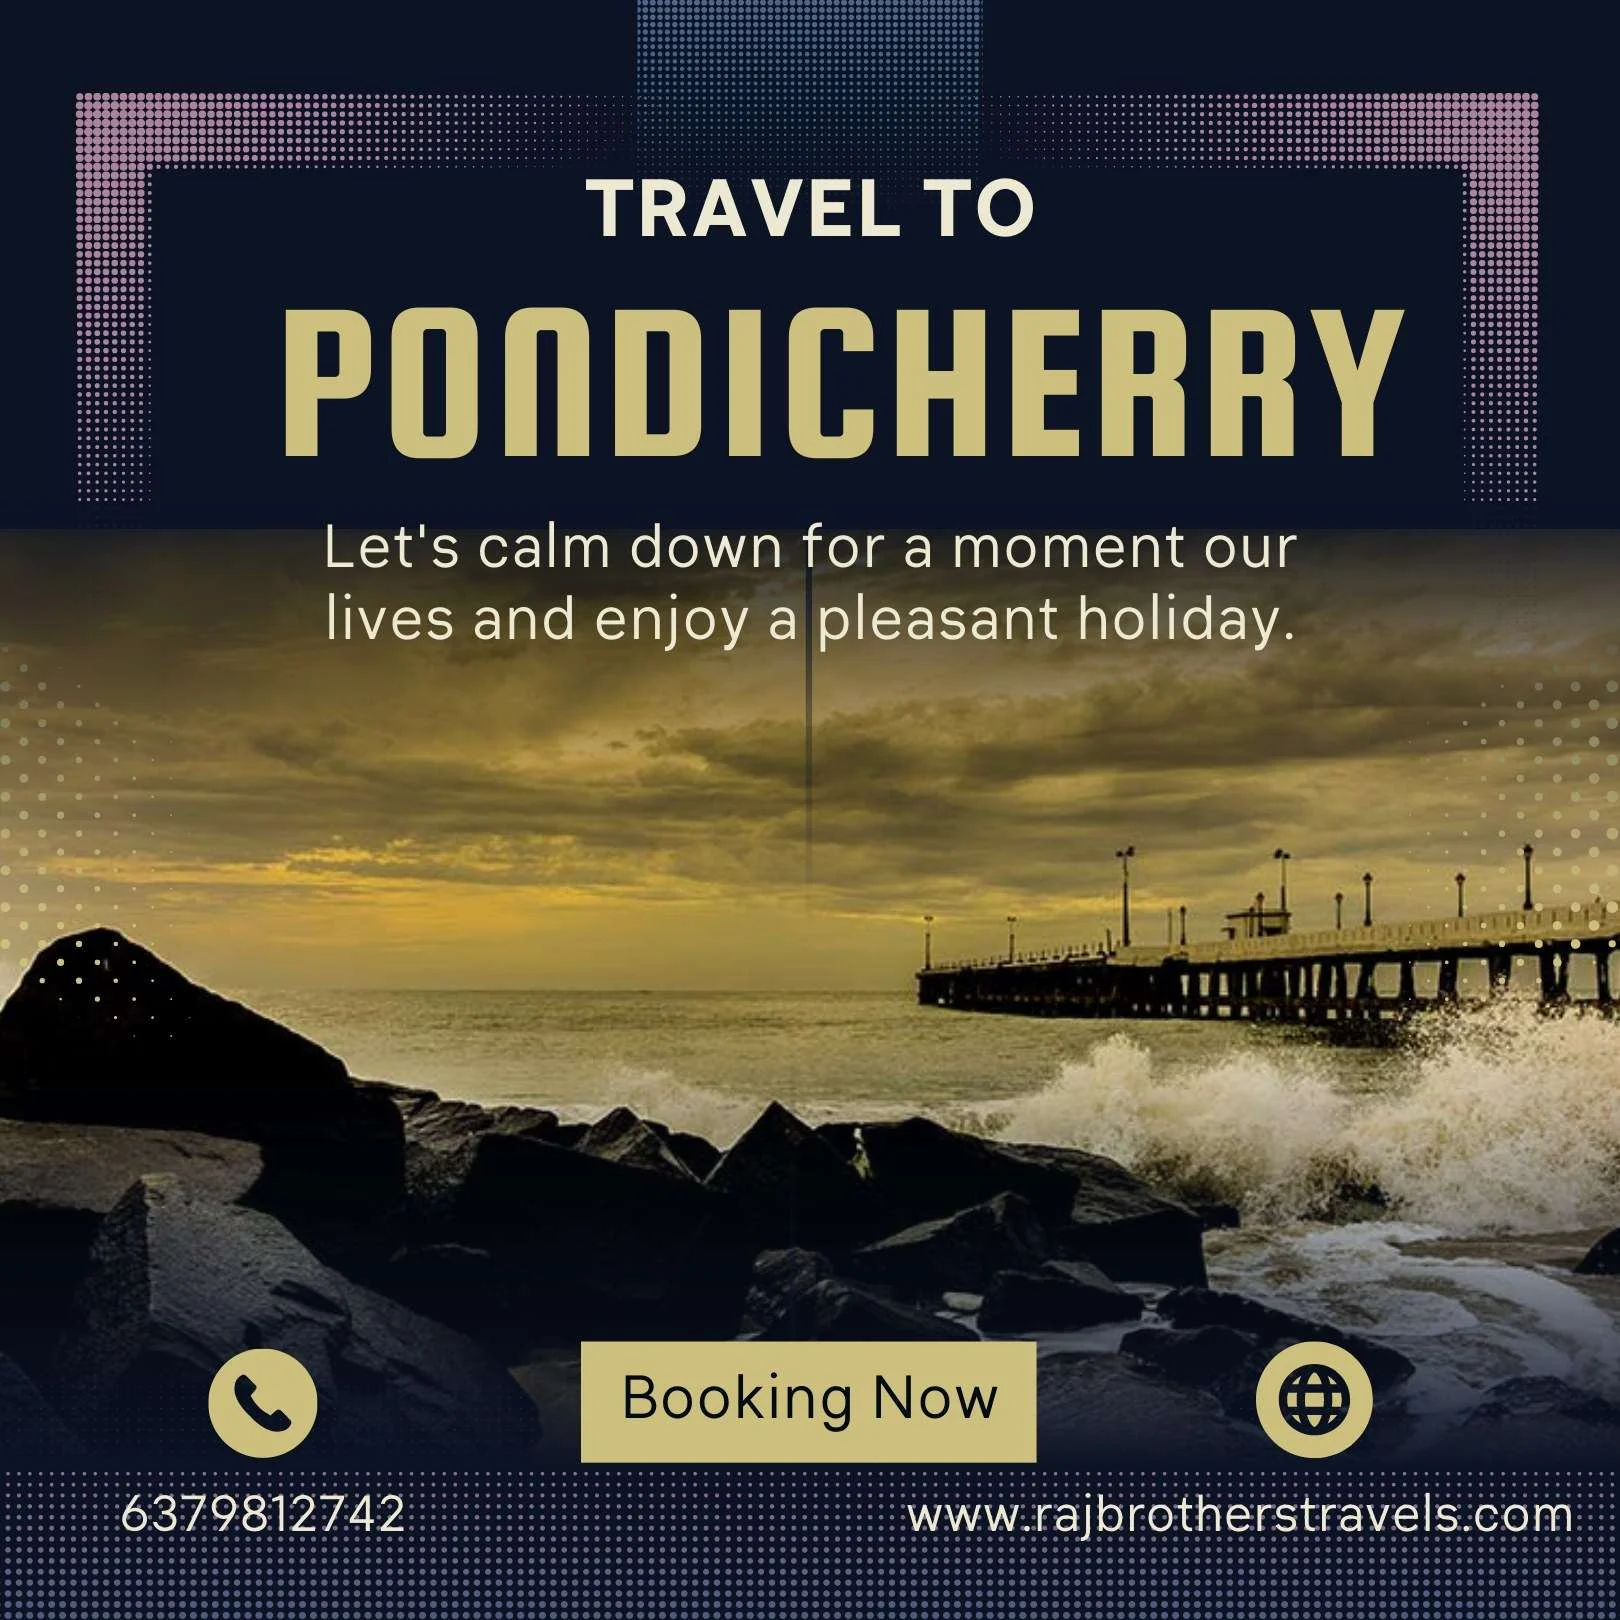 Chennai to Pondicherry tour Packages by Raj Brothers Travels